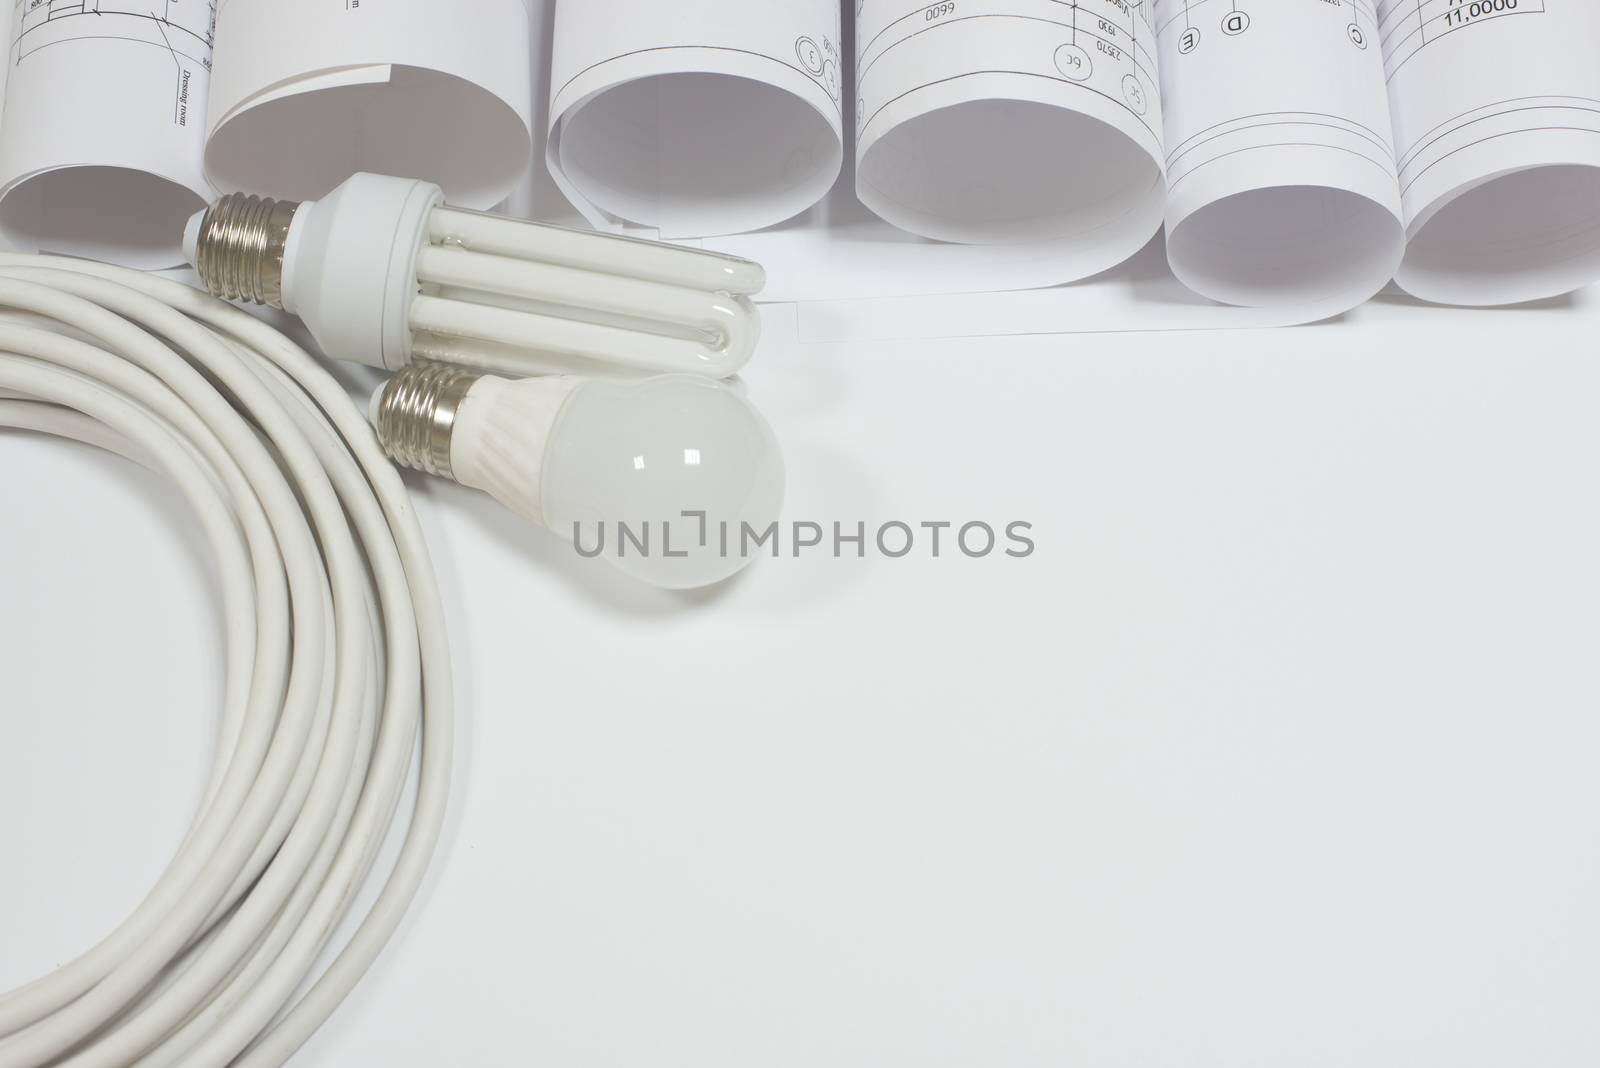 Scrolls architectural drawings with electrical cable and bulbs on white background. Industry concept